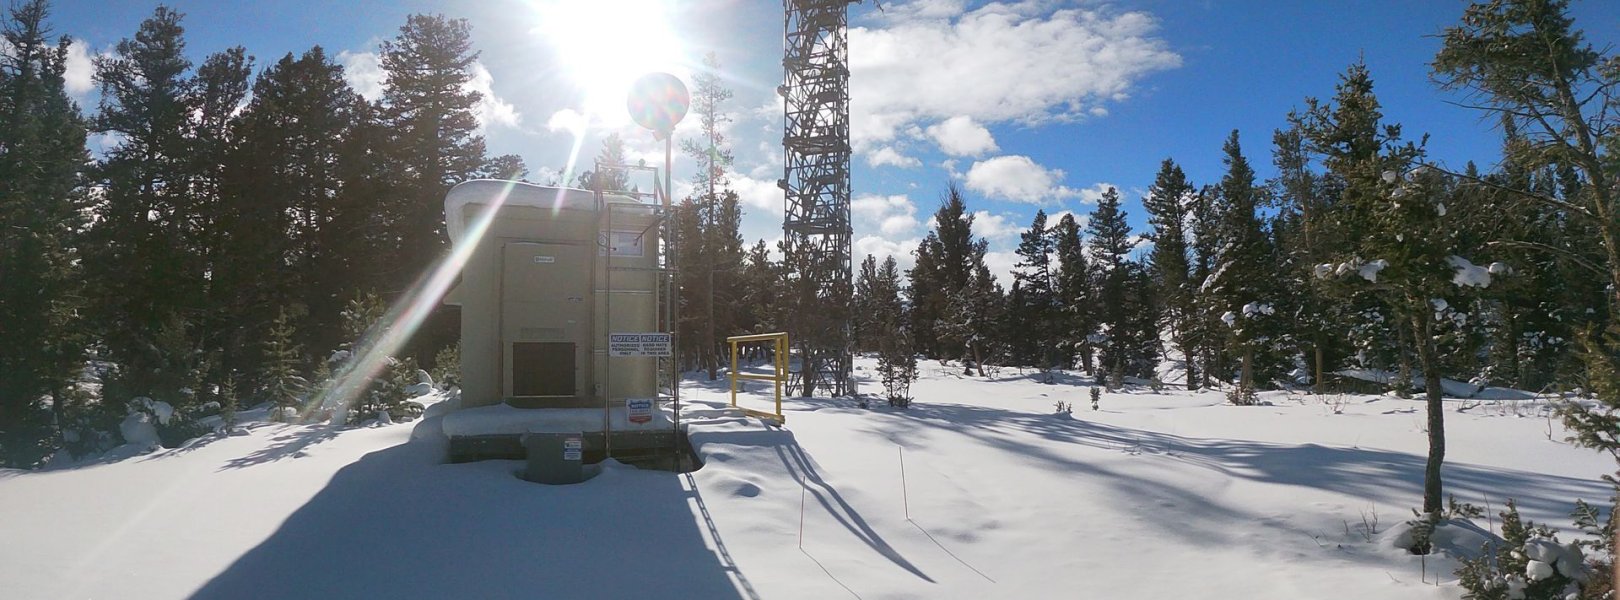 Tower and instrument hut in the snow at Yellowstone